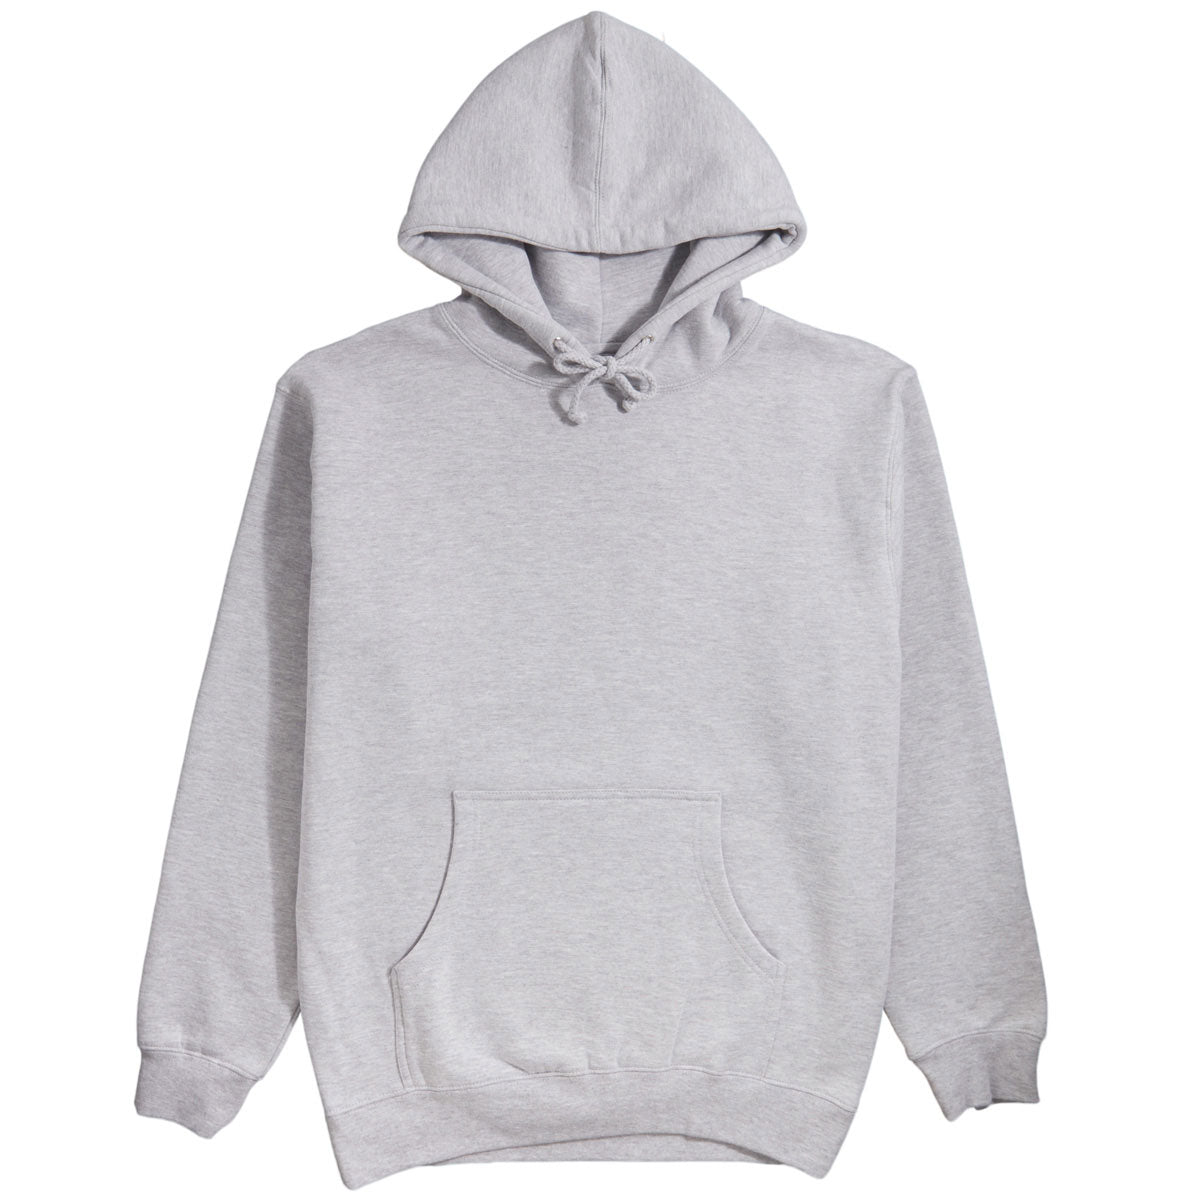 Converse Body Horror Pullover Hoodie - Heather Grey - XL image 1